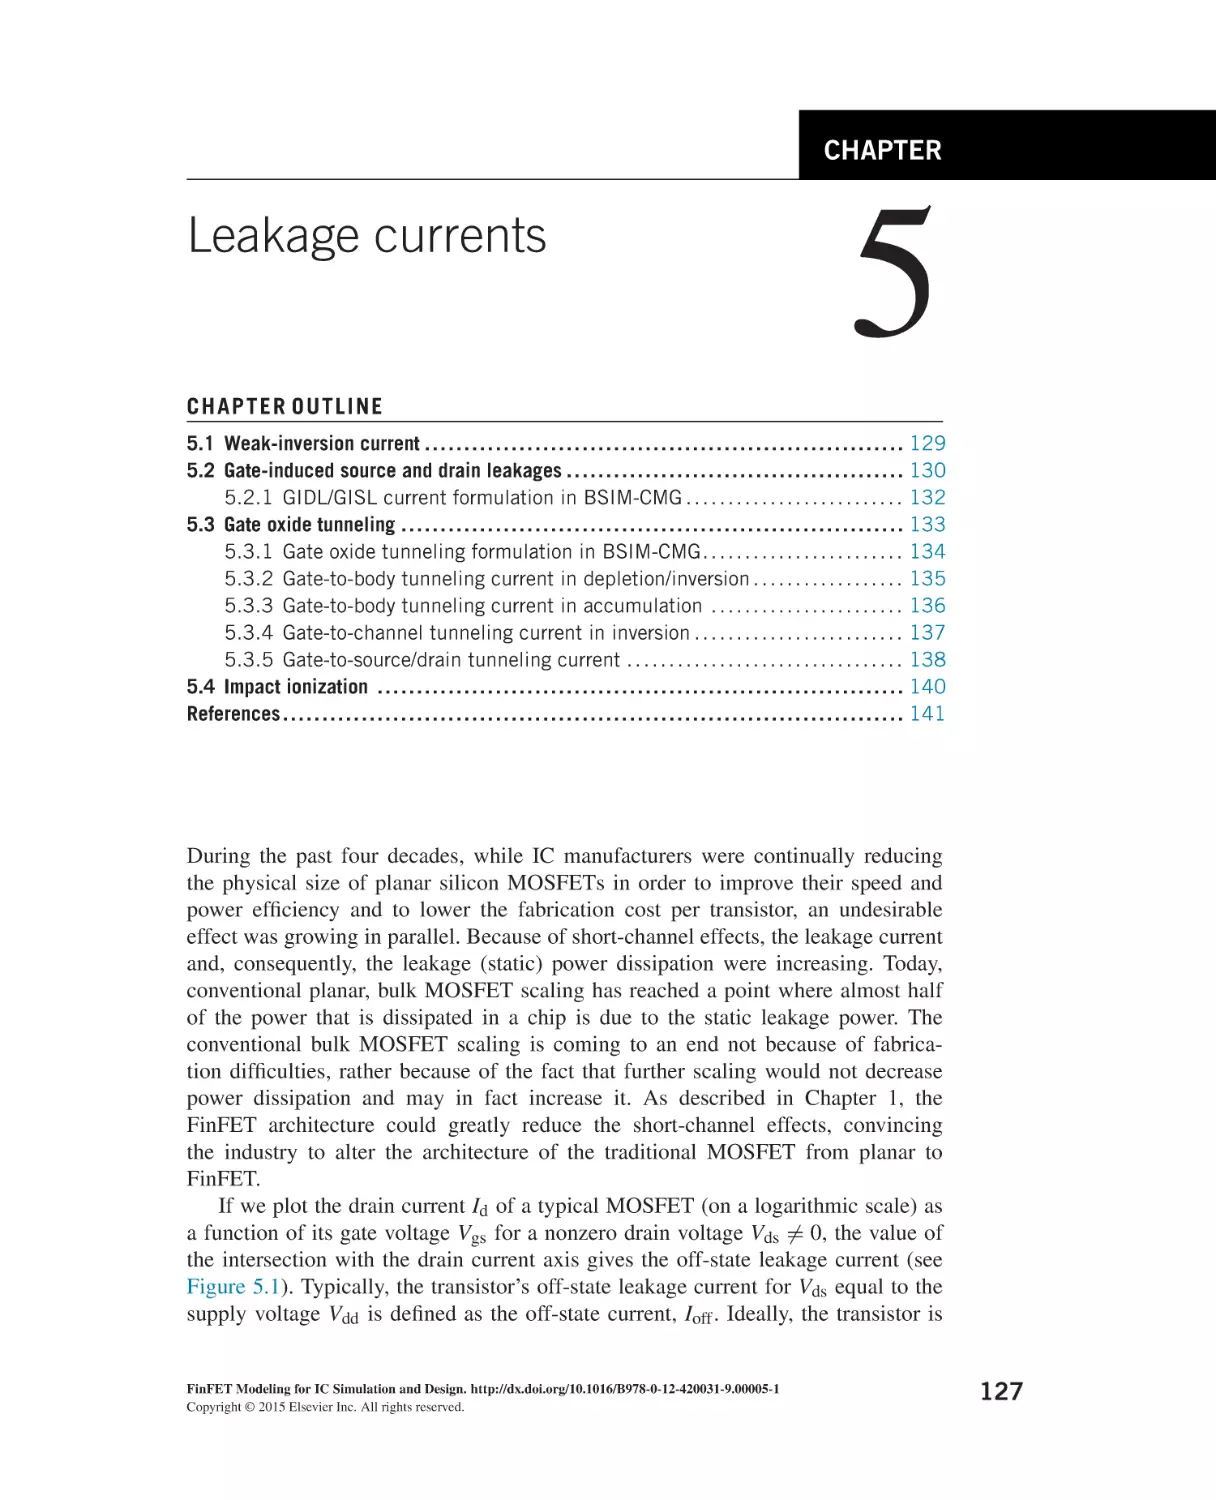 Leakage currents